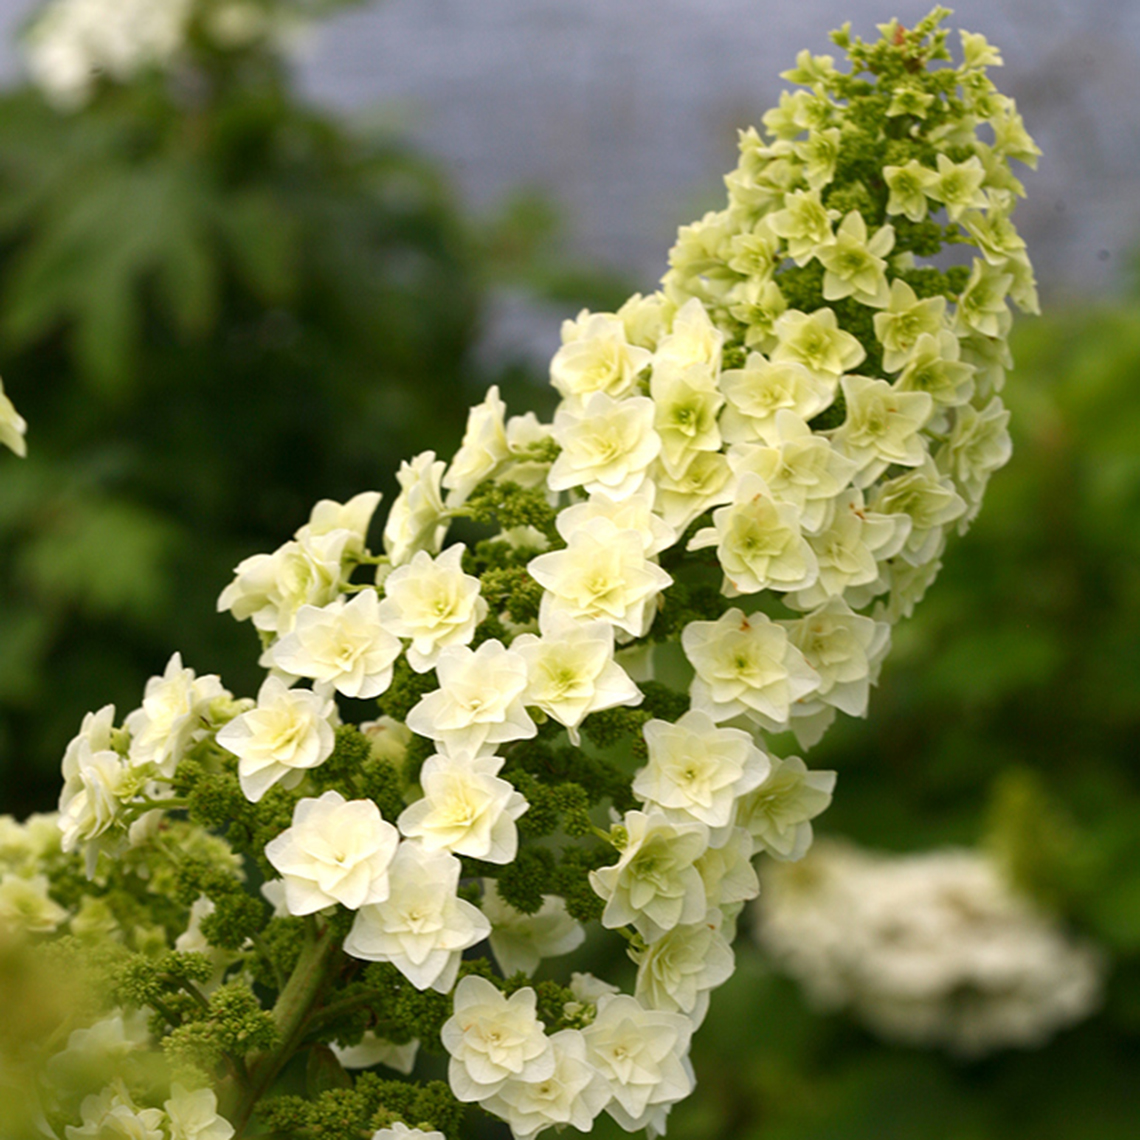 An inflorescence of Gatsby Star oakleaf hydrangea with its stacked double florets clearly visible